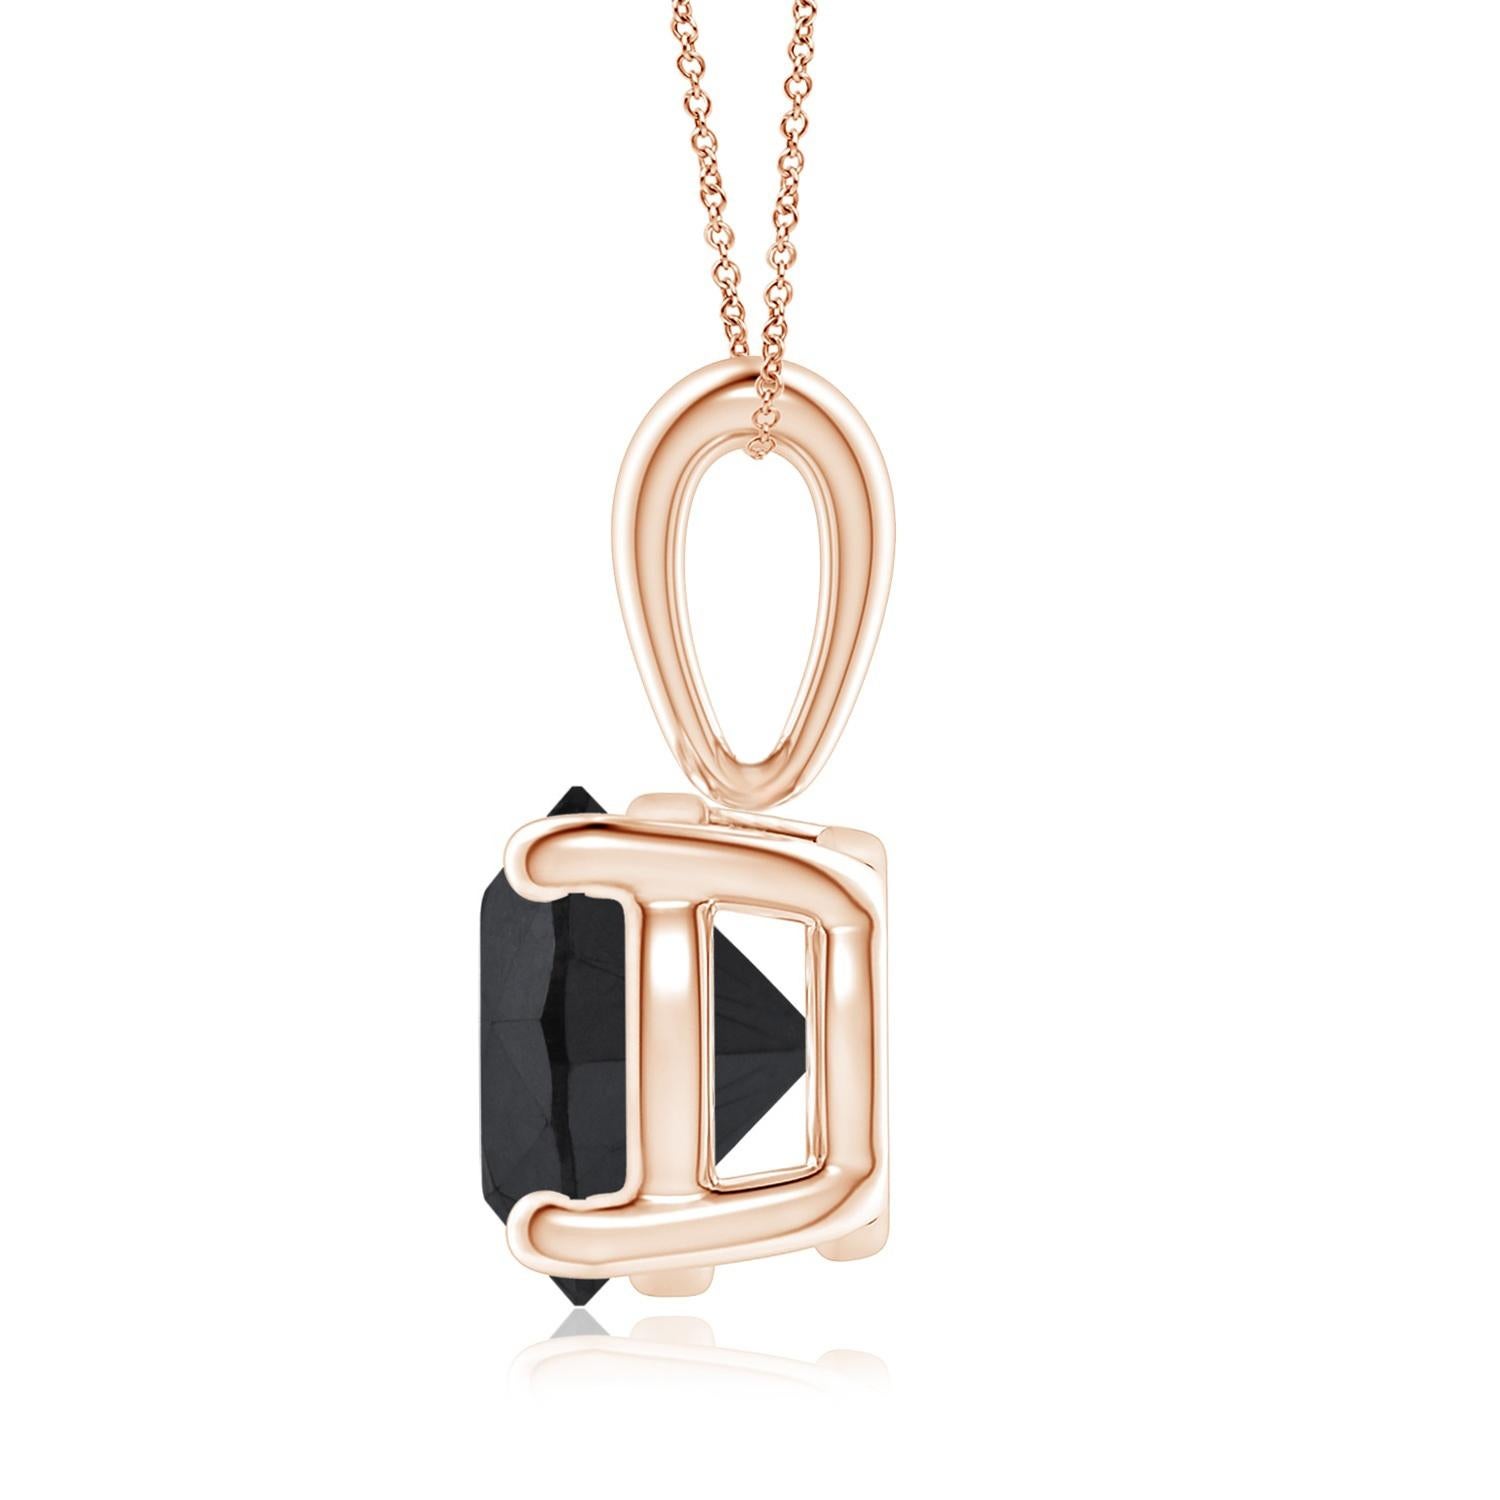 Surprise a special woman in your life with this breathtaking, statement hand crafted solitaire black diamond necklace. This eye-catching pendant necklace features a 1.55 carat round cut black diamond, measuring 6.73 x 6.79 x 4.52 mm set in 14k rose